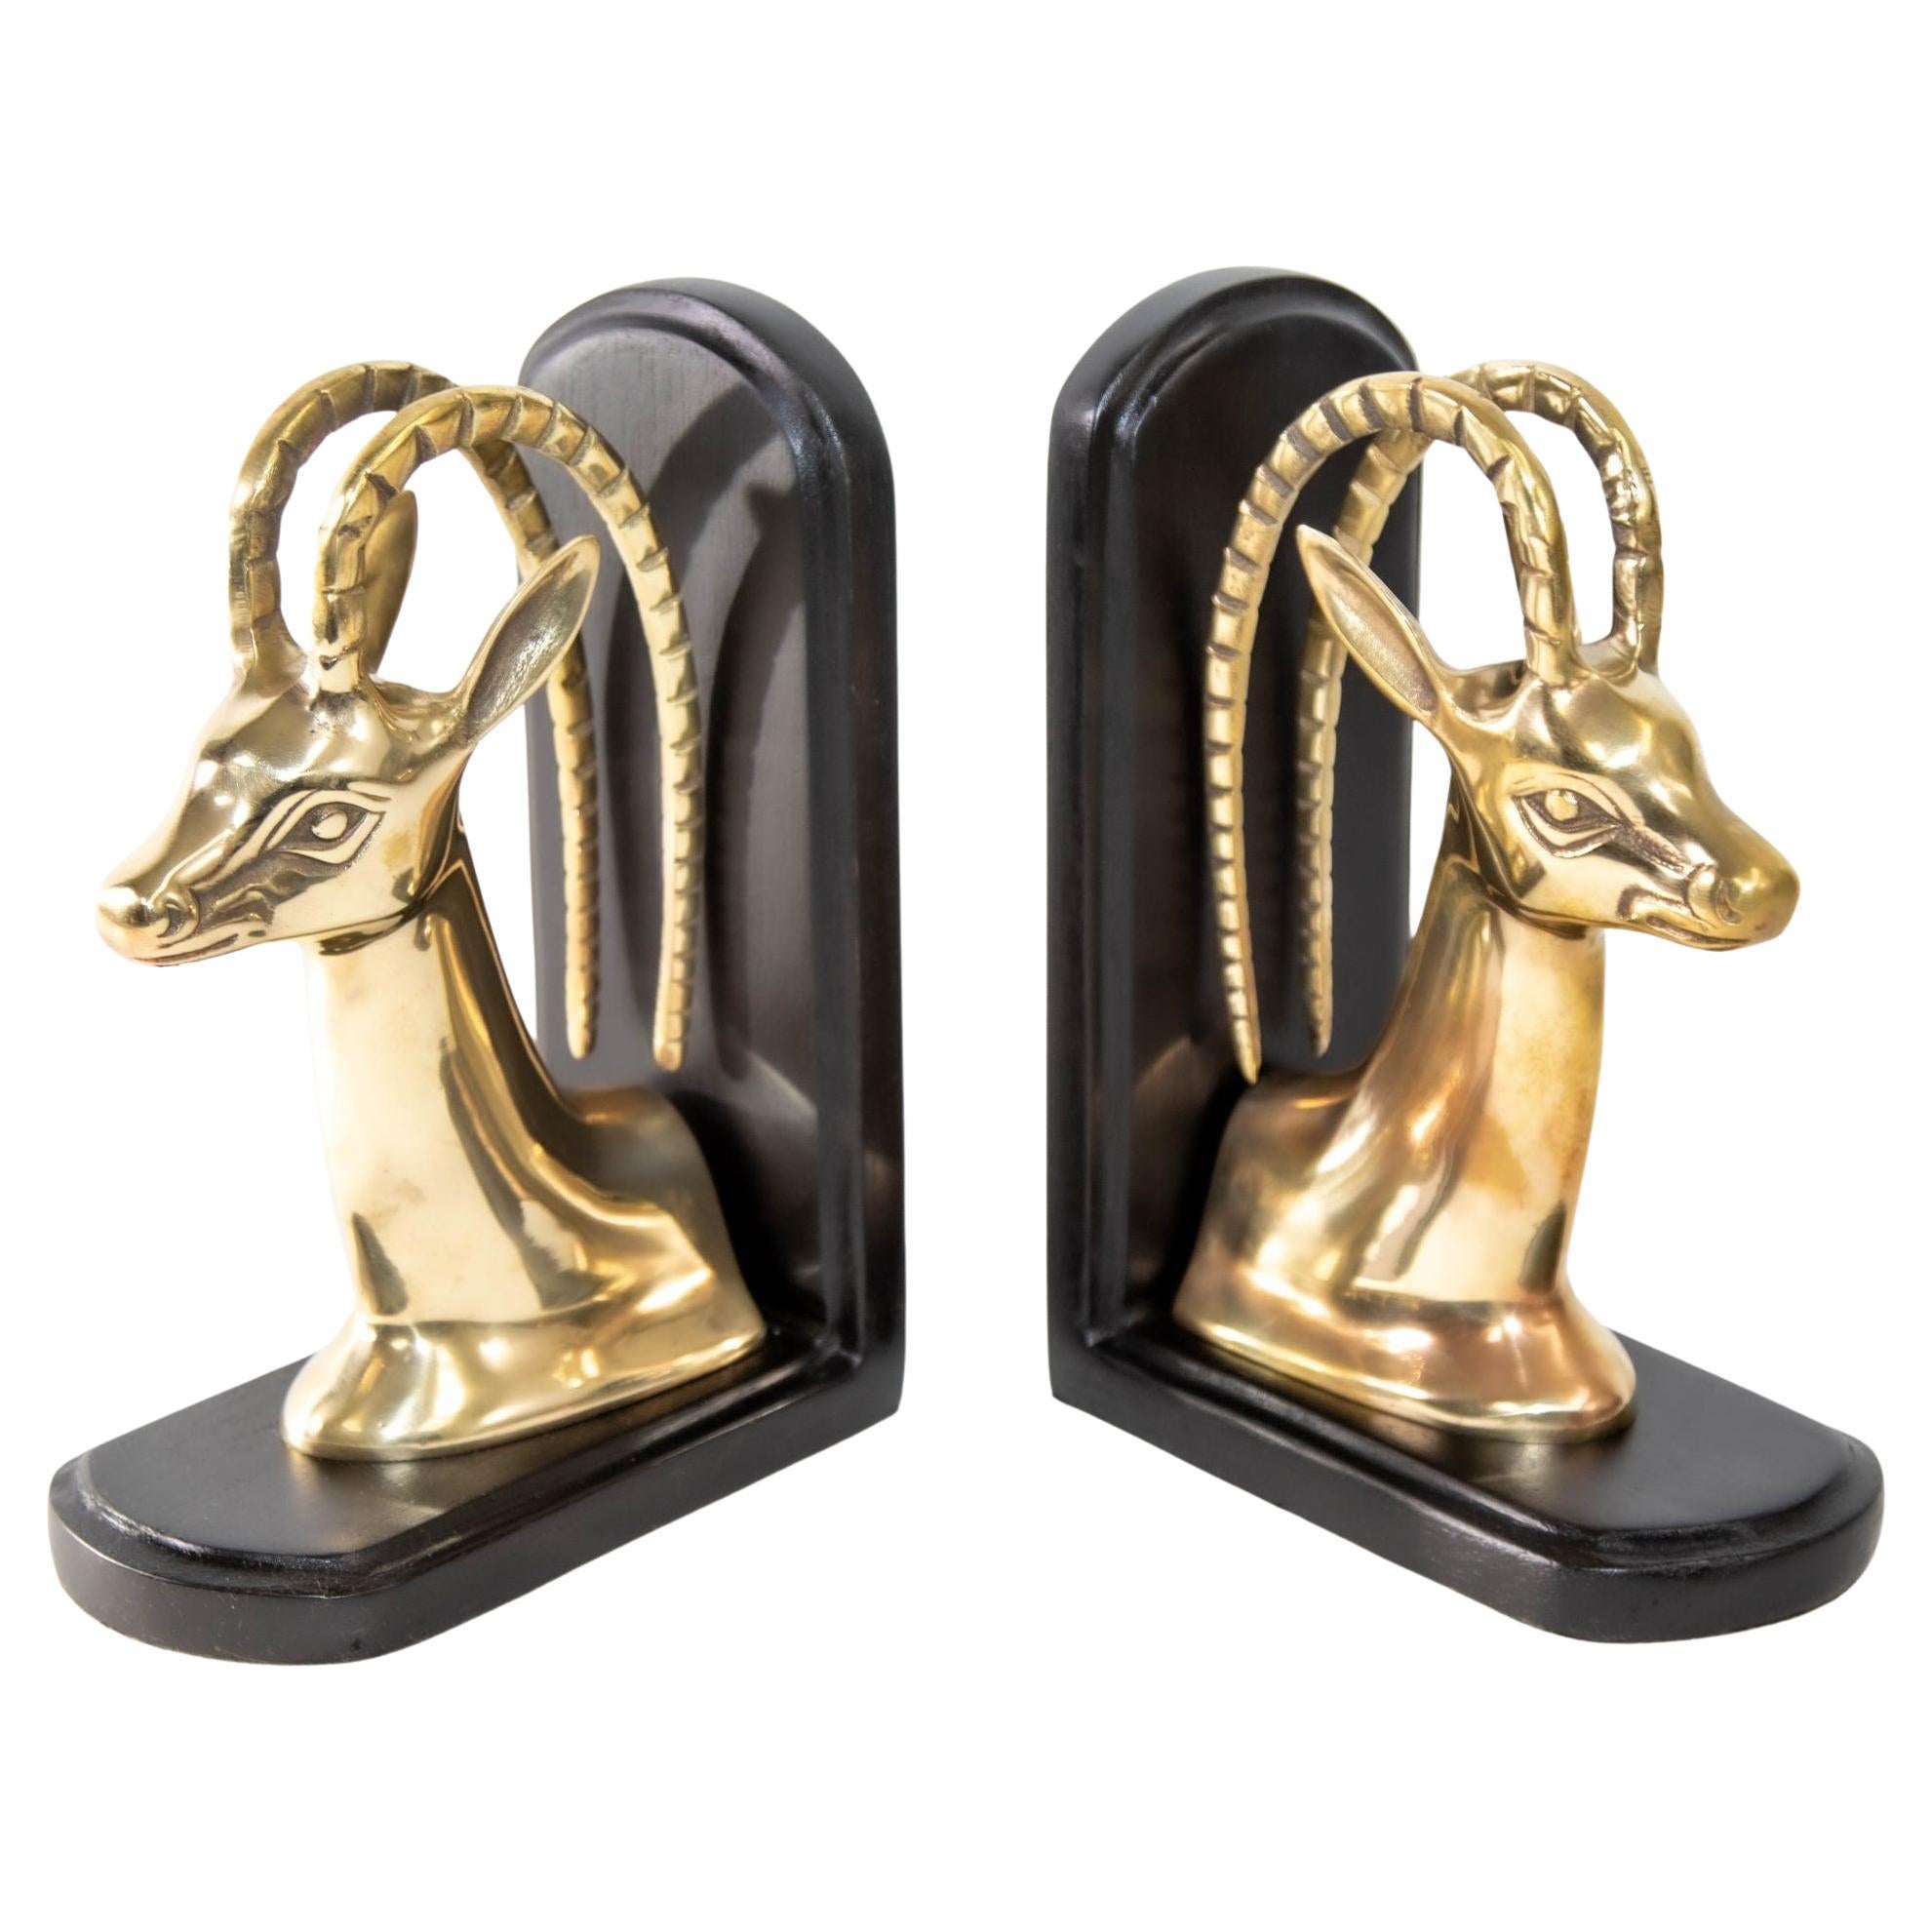 1950s Pair Art Deco Revival Polished Brass Gazelle Antelope Mount Bookends